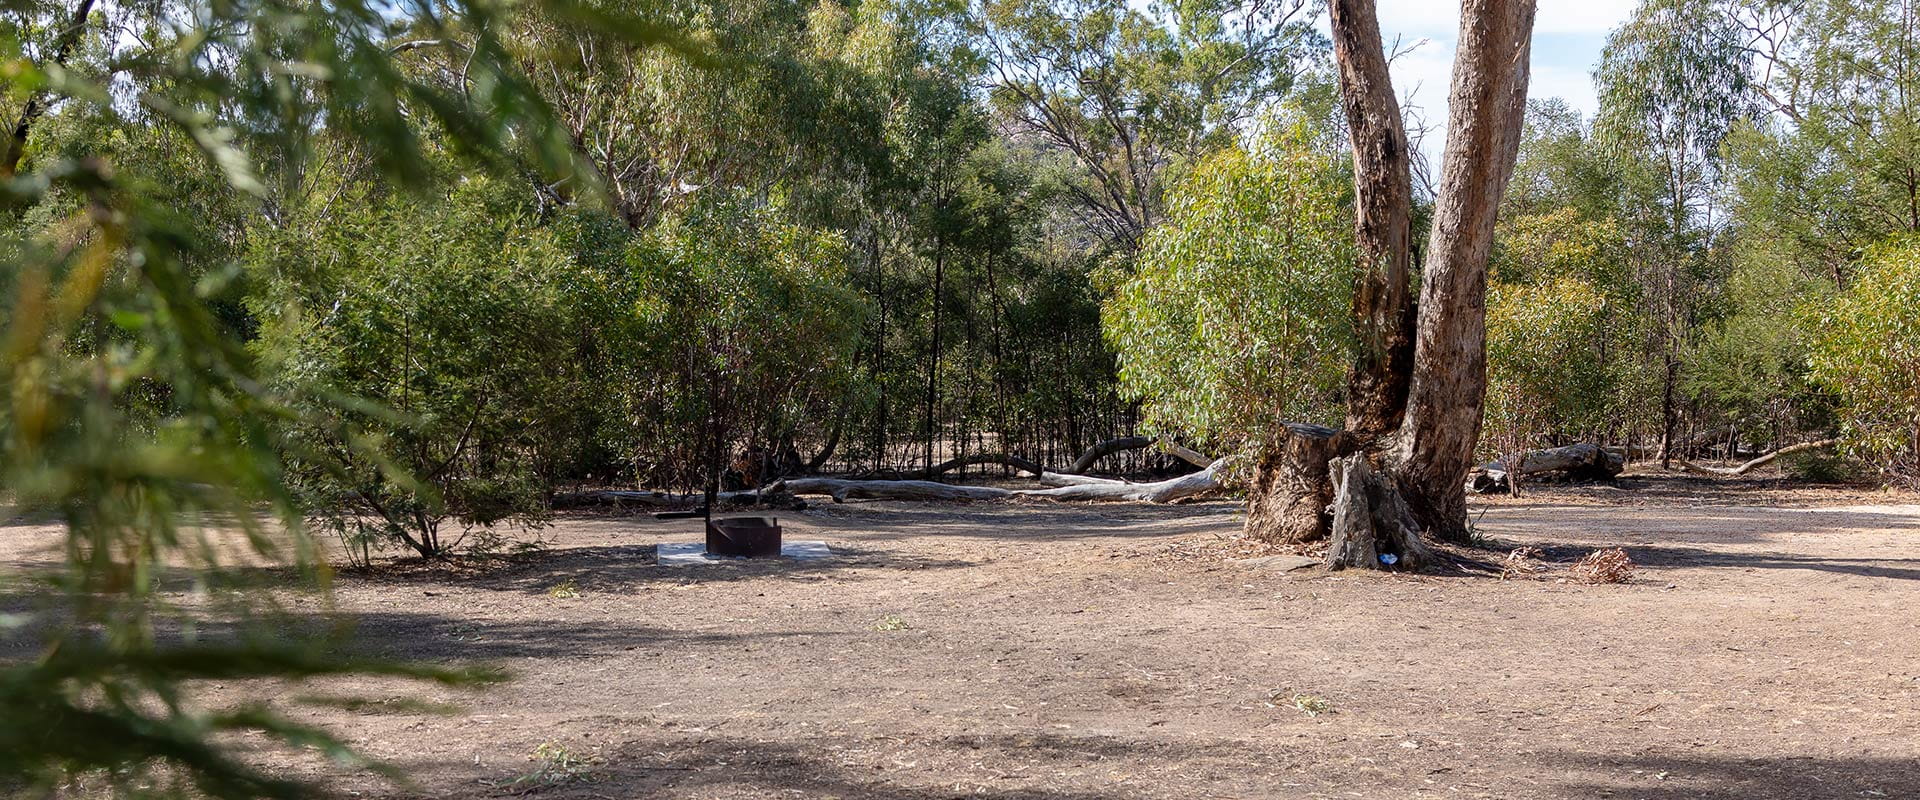 A campground with a fireplace surrounded by small trees